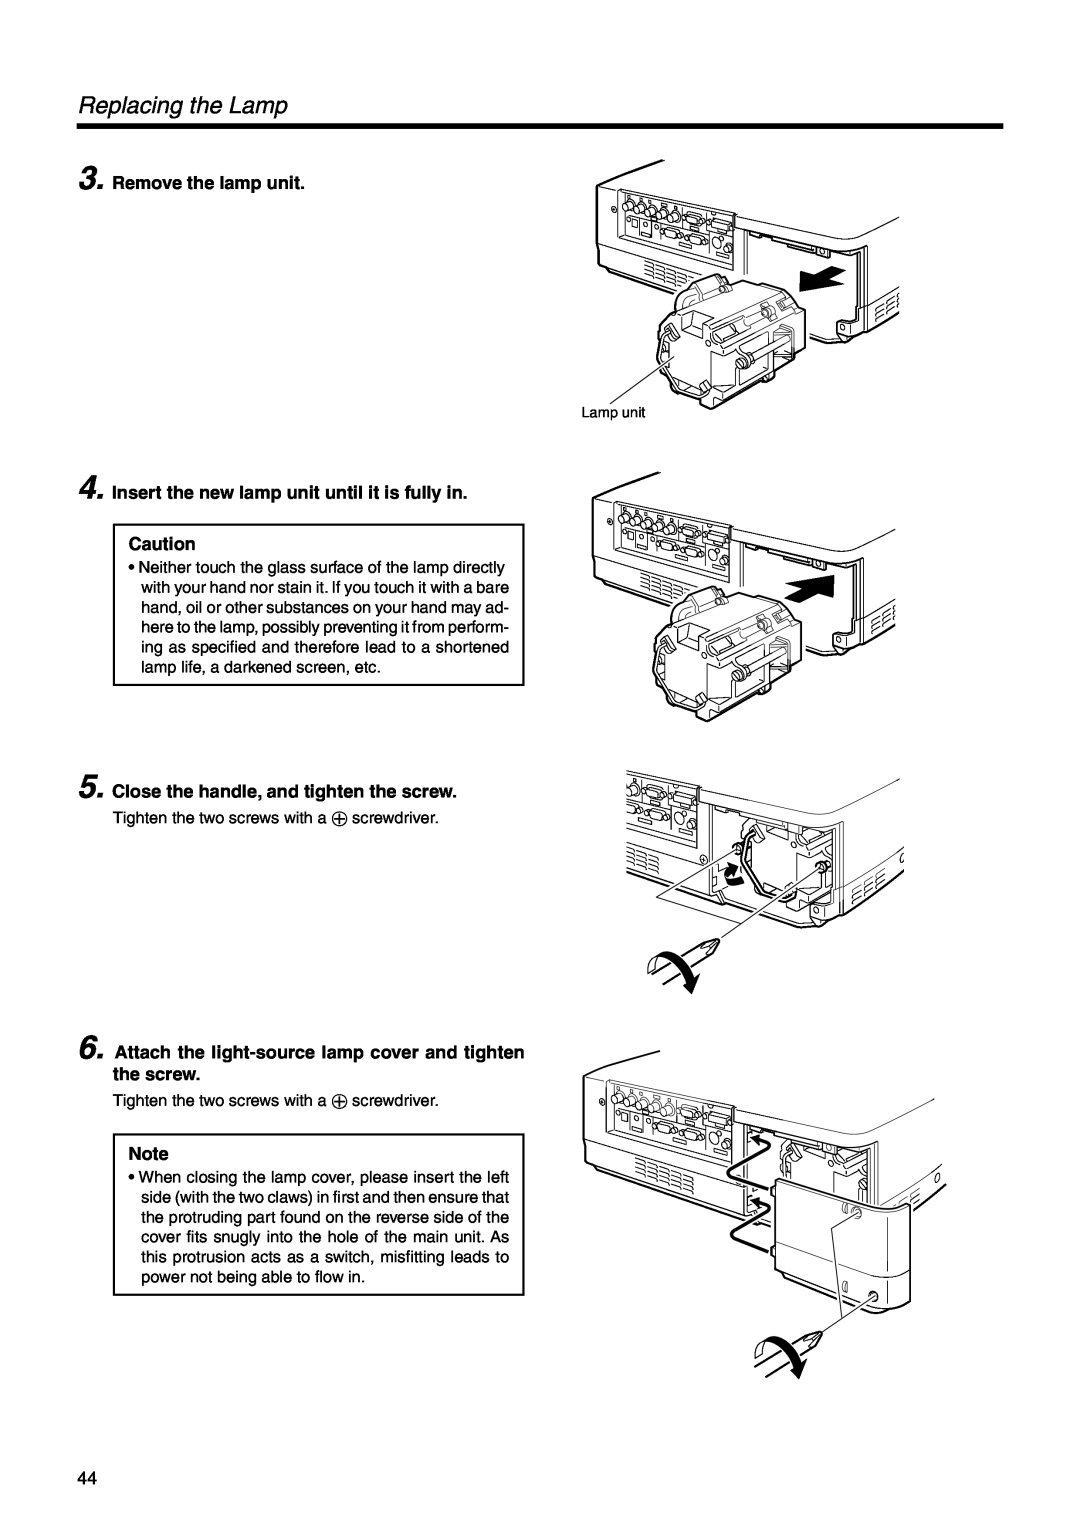 Dukane 28A9017 user manual Replacing the Lamp, Remove the lamp unit, Insert the new lamp unit until it is fully in 